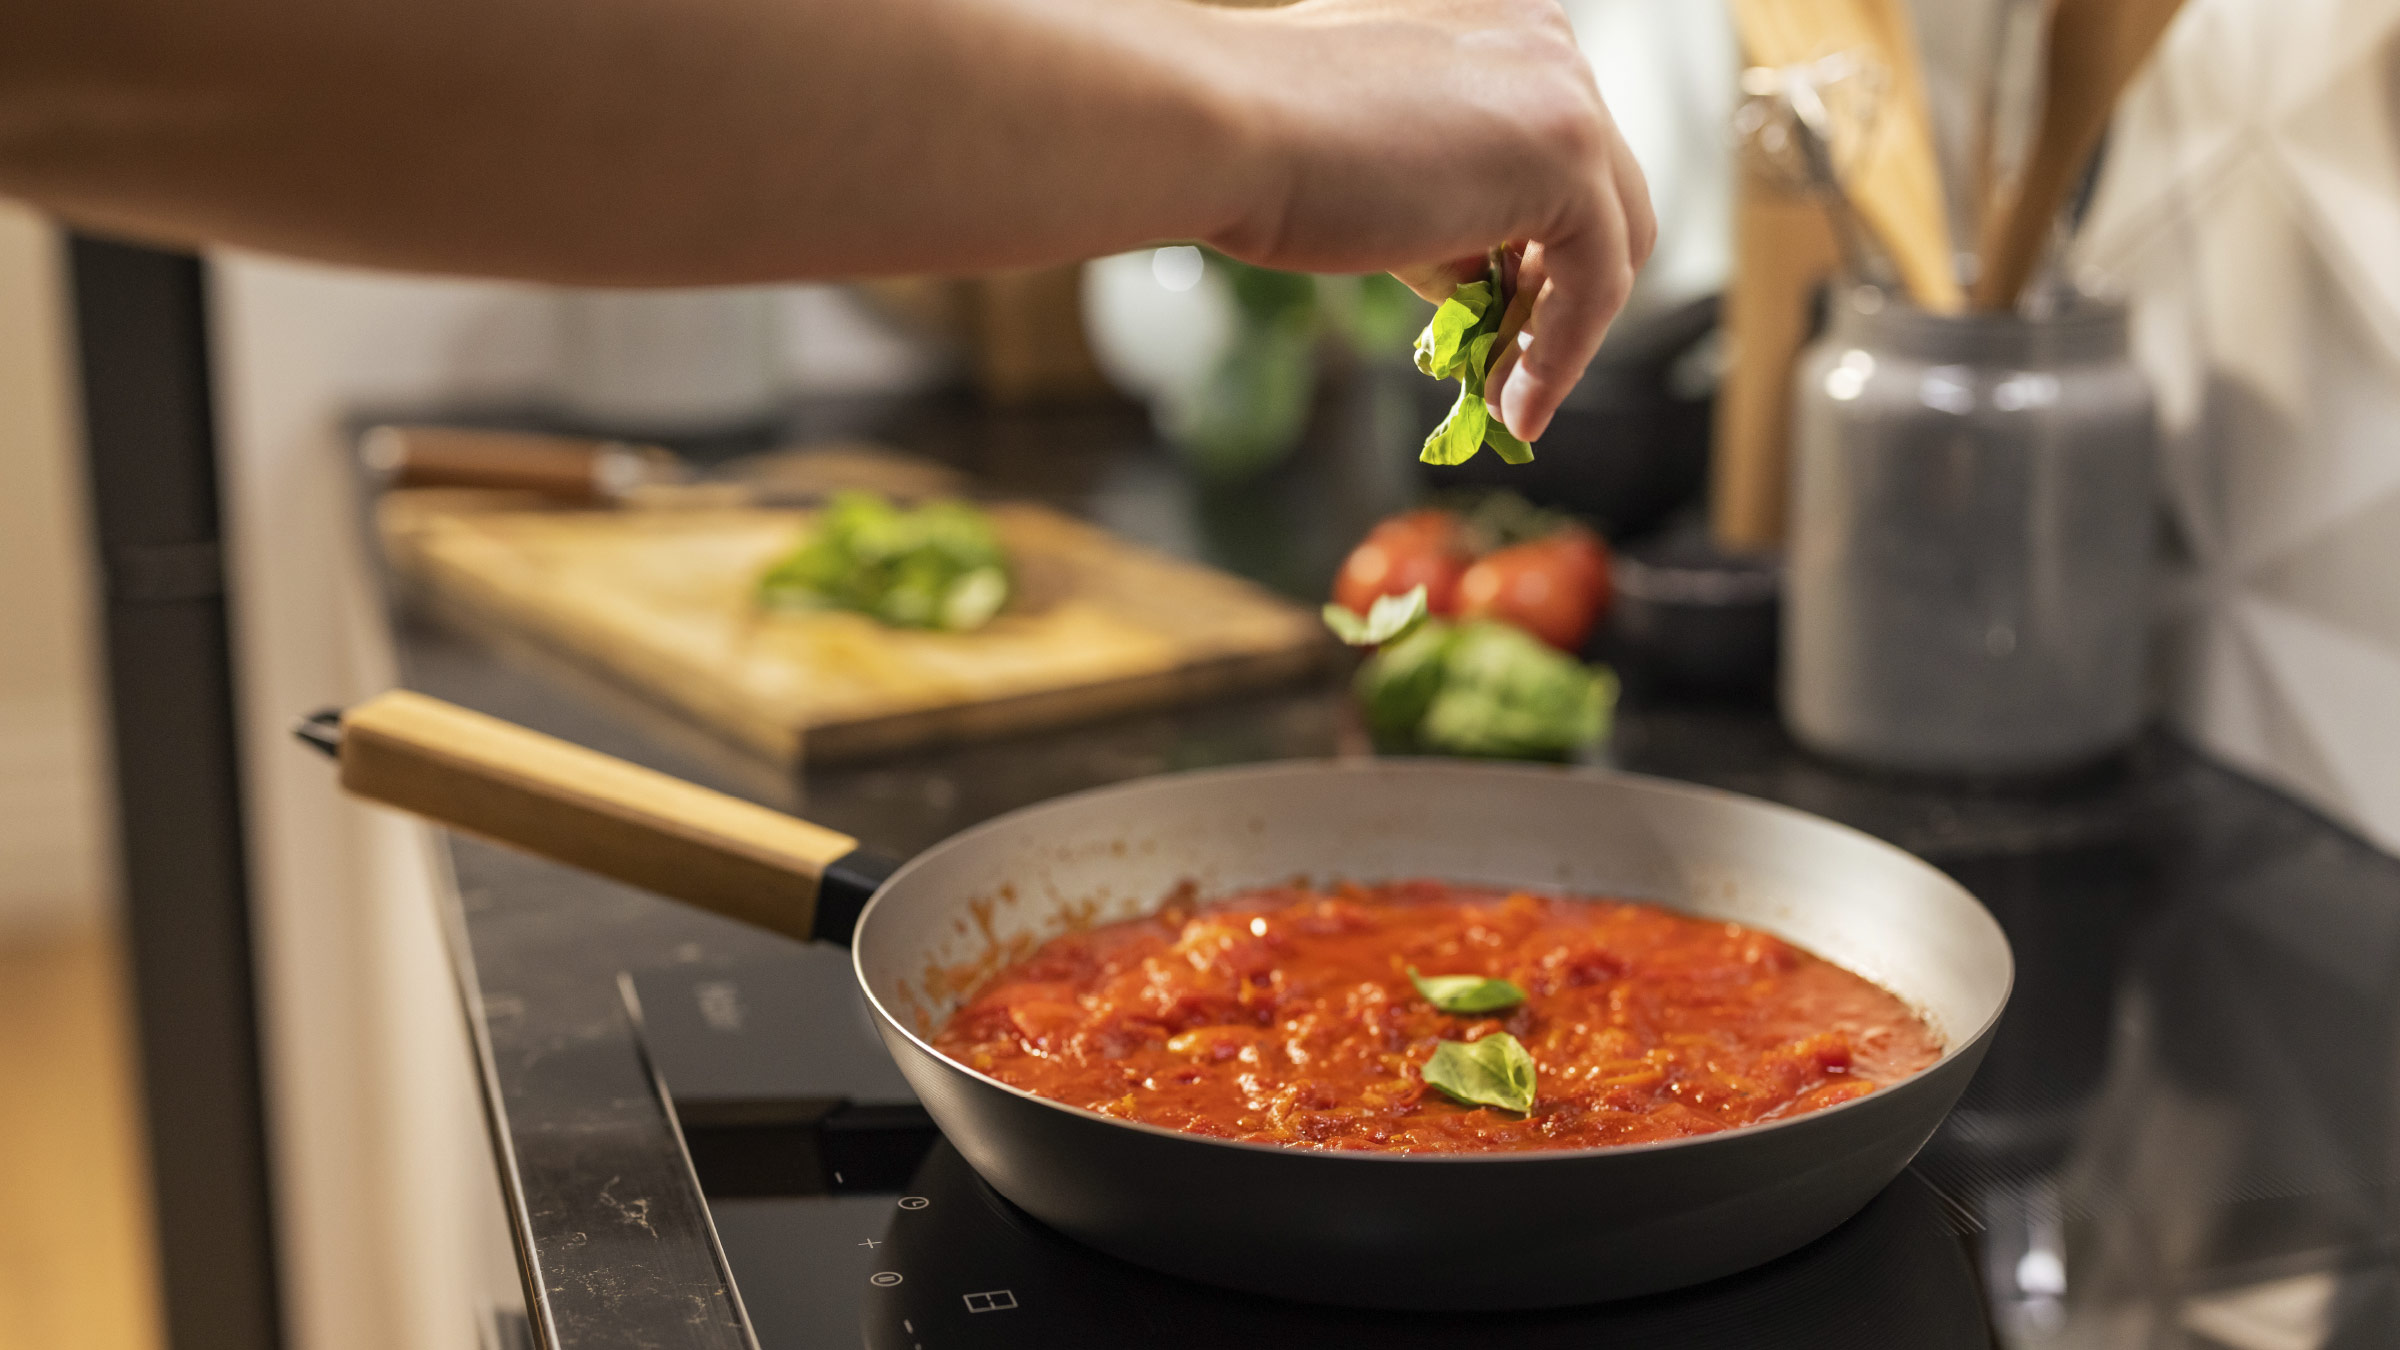 Cooking tomato and basil on Haier's new low current induction cooktop.